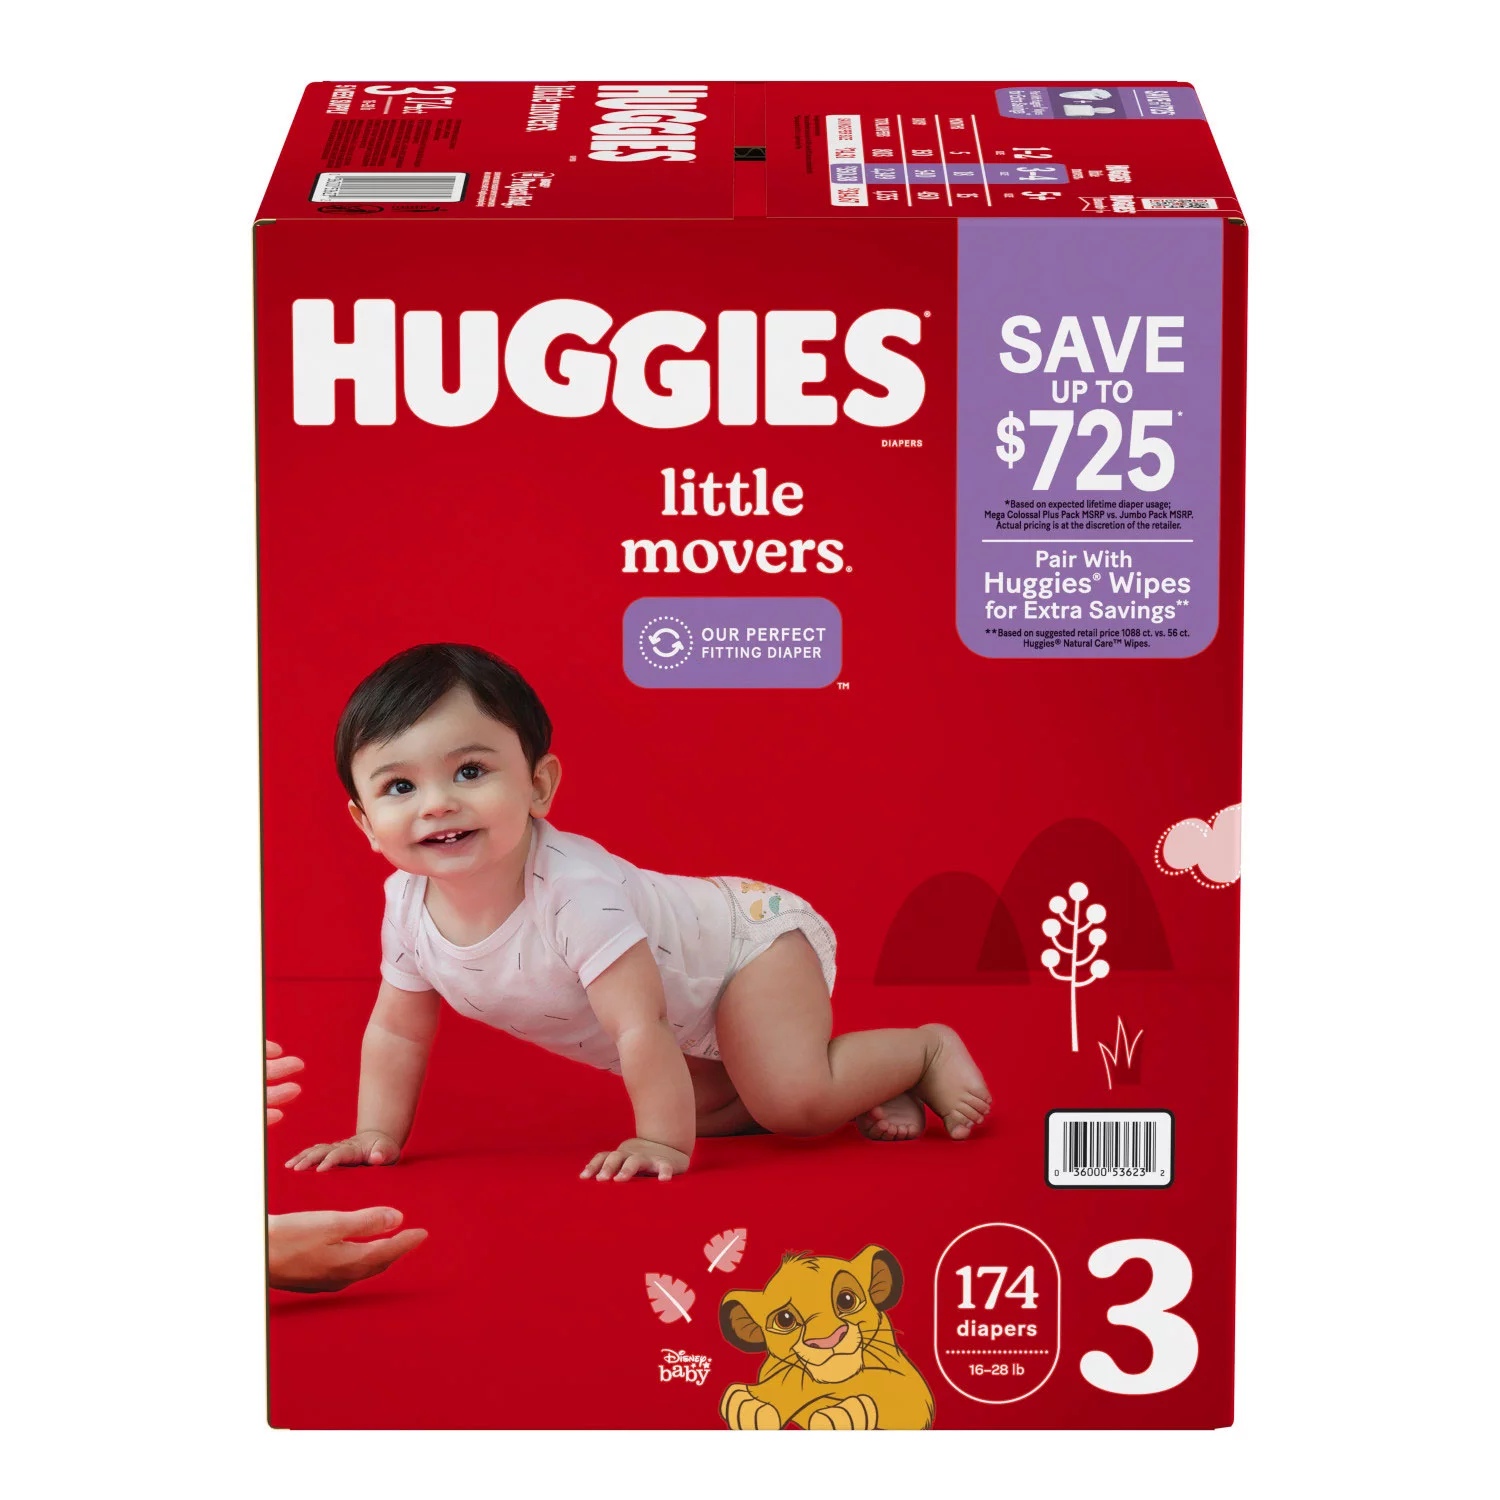 Huggies Little Movers Plus, Size 4, Pack of 174 